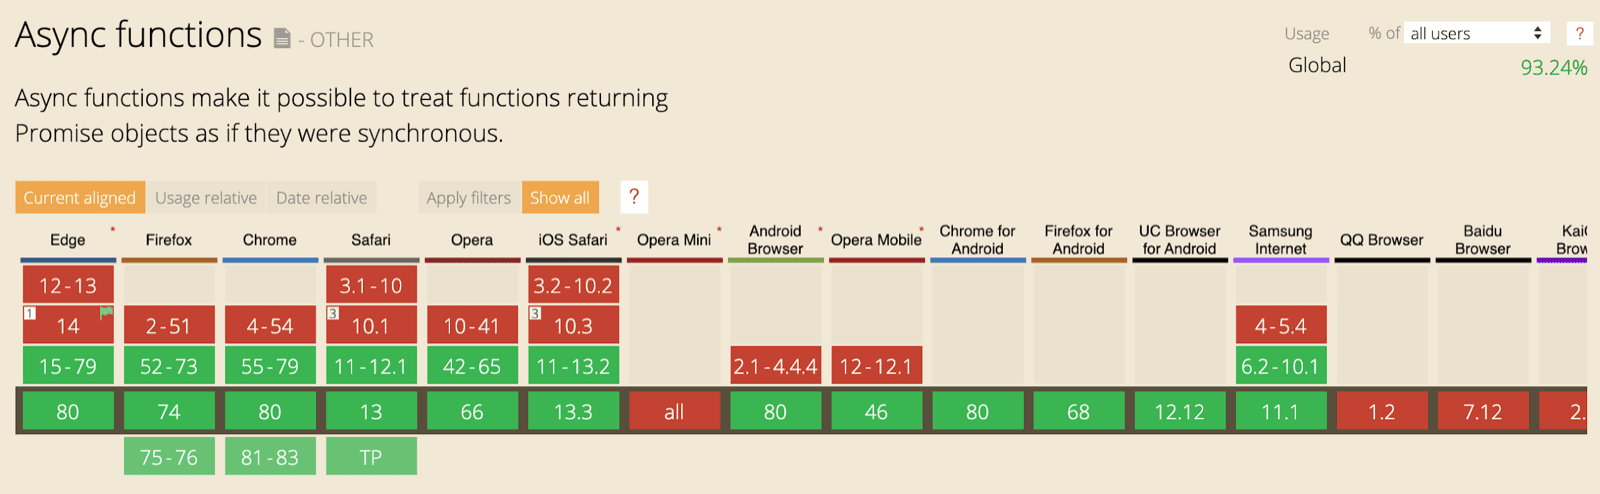 The CanIUse support table for async functions showing support across all major browsers.